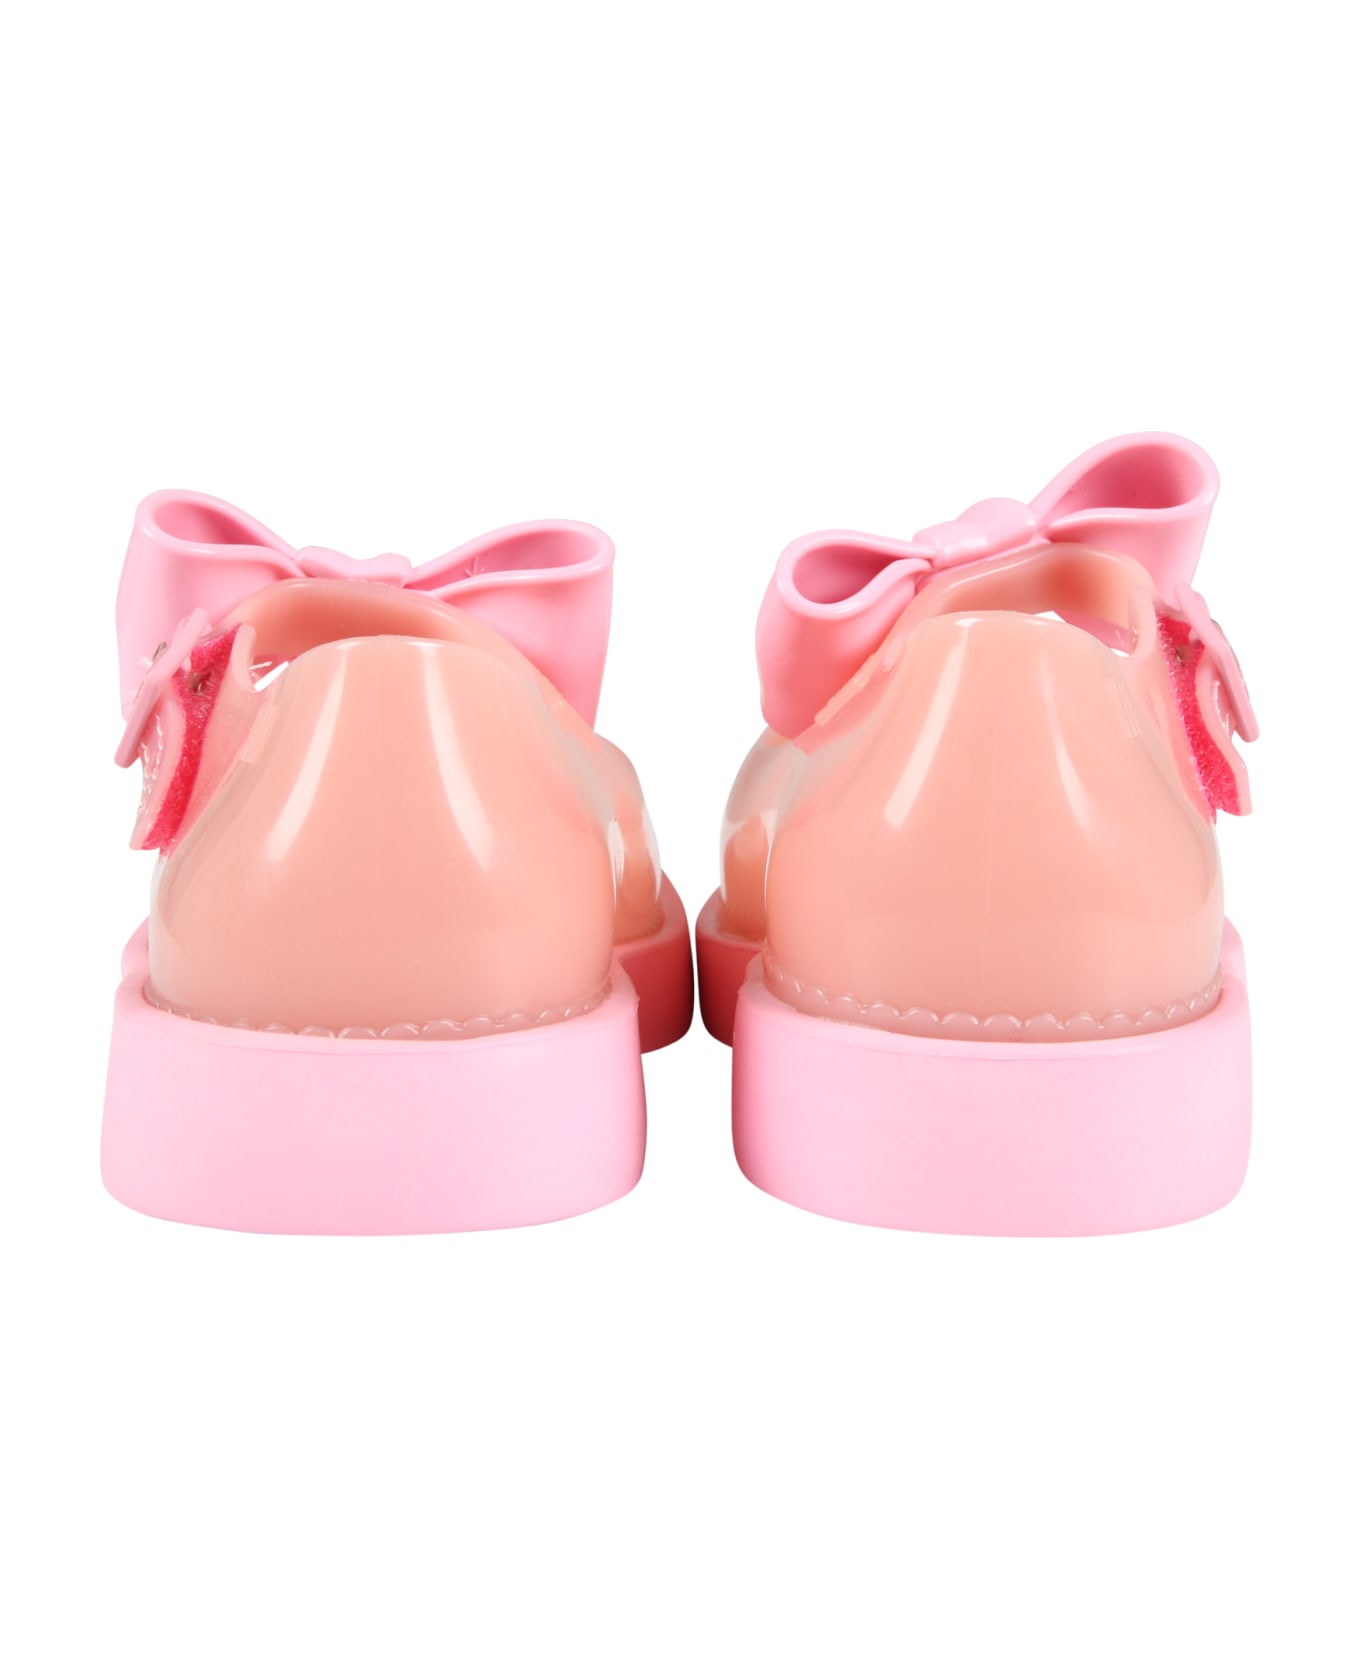 Melissa Pink Ballerina-flats For Girl With Bow - Pink